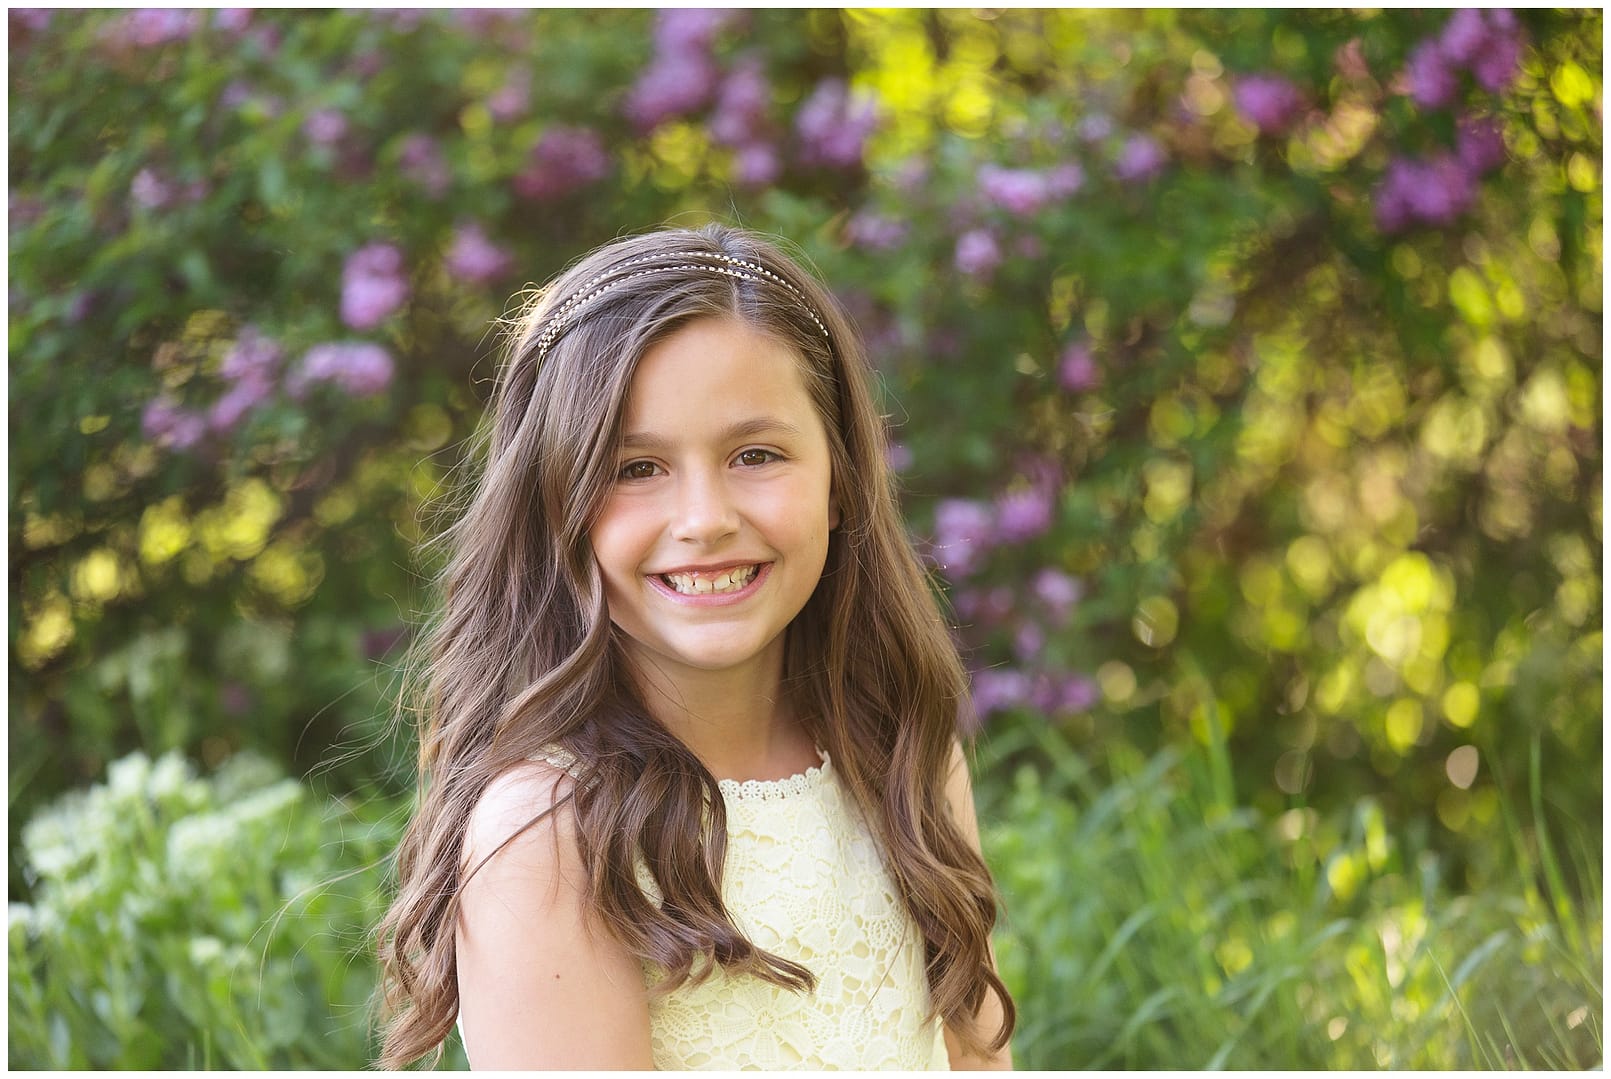 Young girl poses for photograph amongst lilacs. Photos by Tiffany Hix Photography.